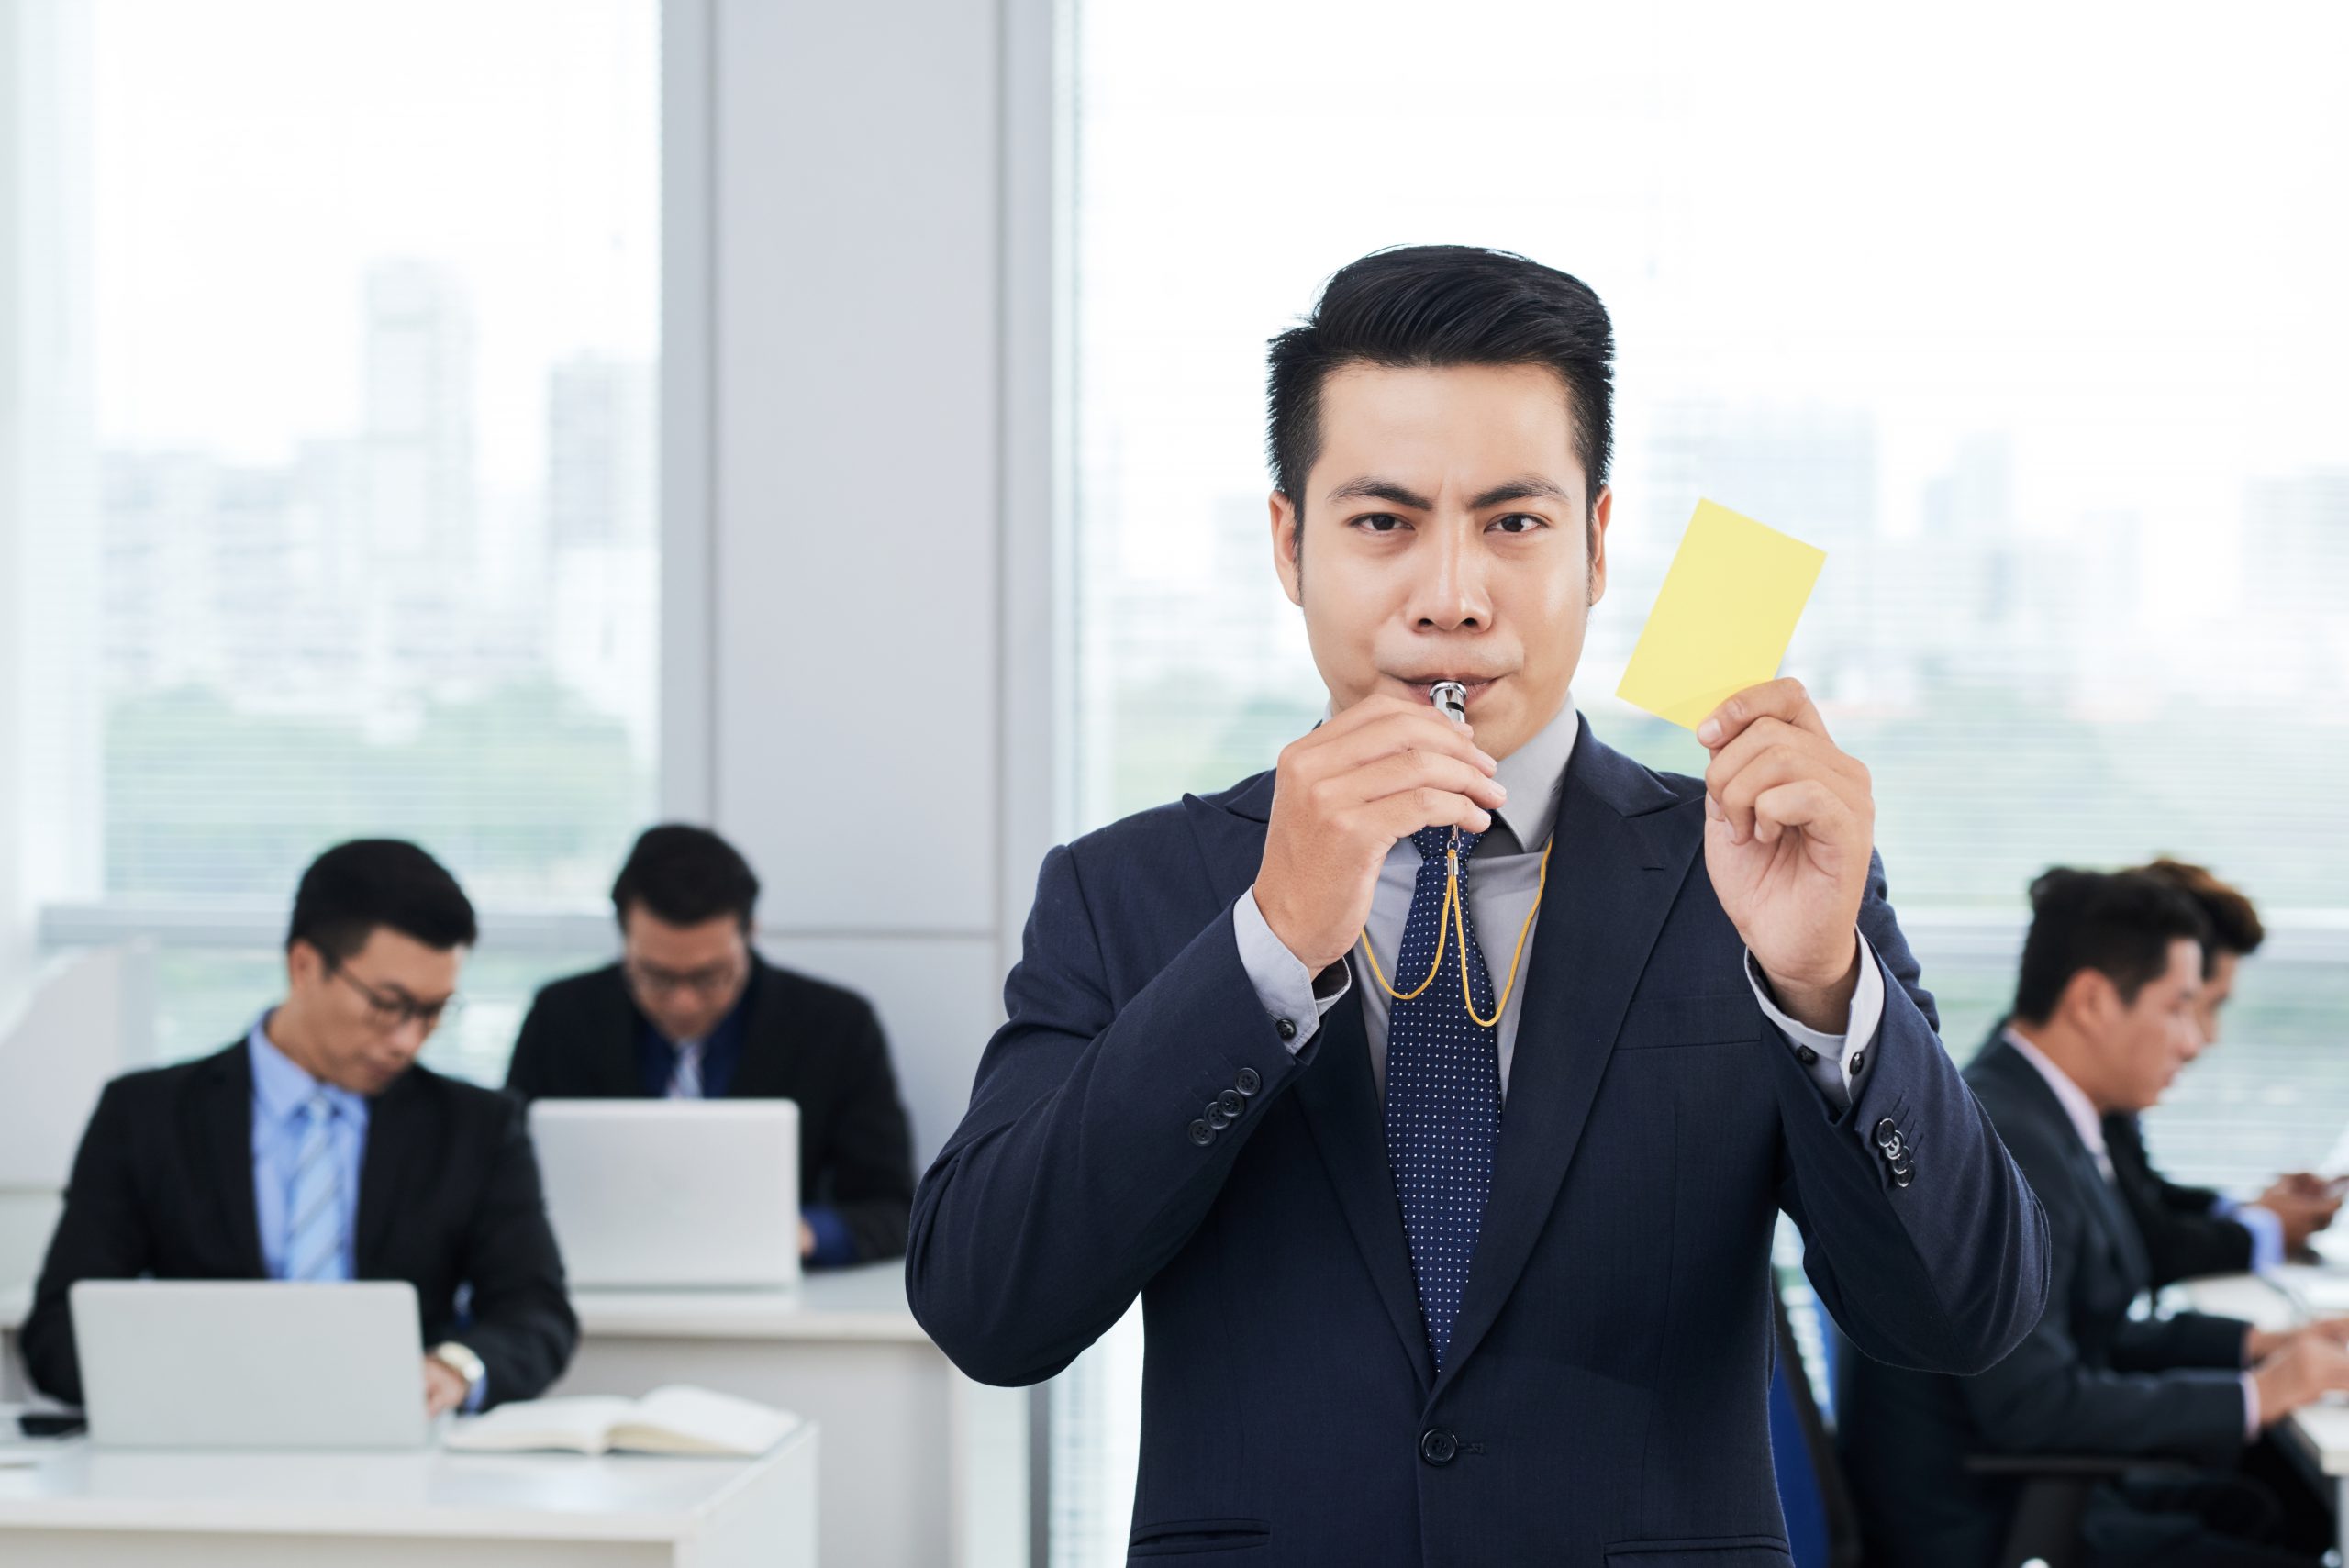 5 Examples of Workplace Violations Employers Do